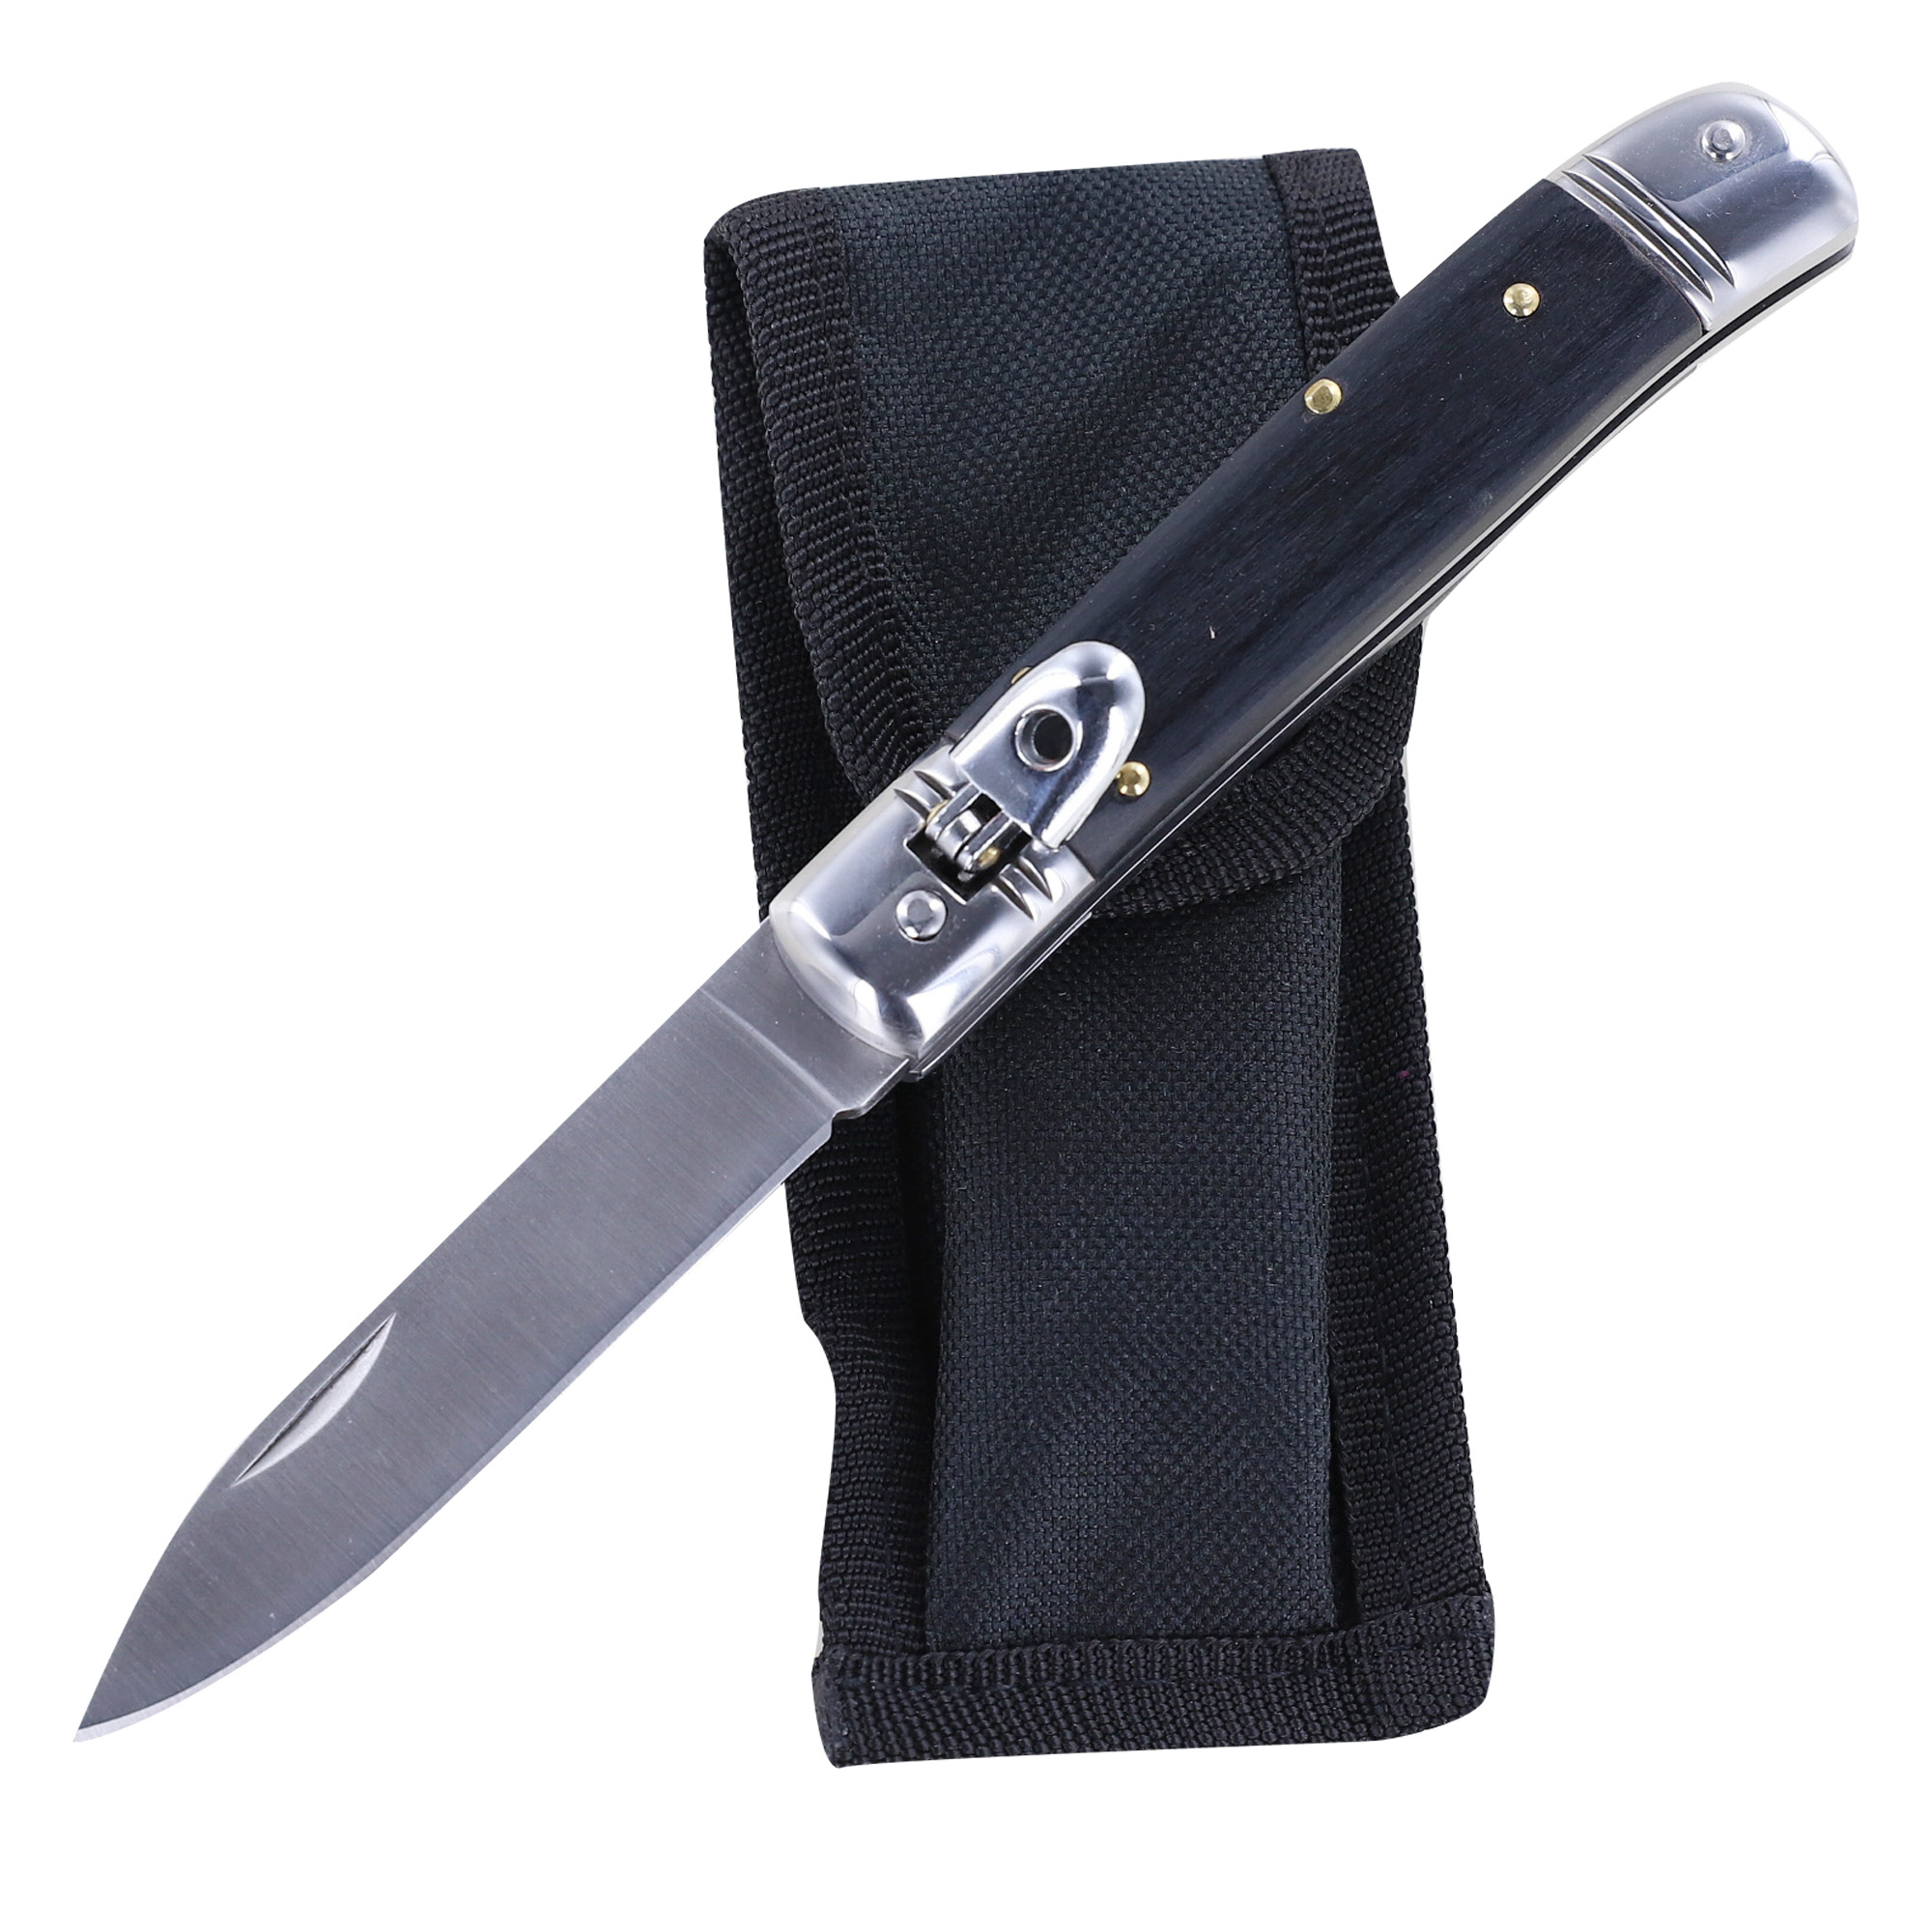 Trial by Fire Automatic Lever Lock SWITCHBLADE Knife